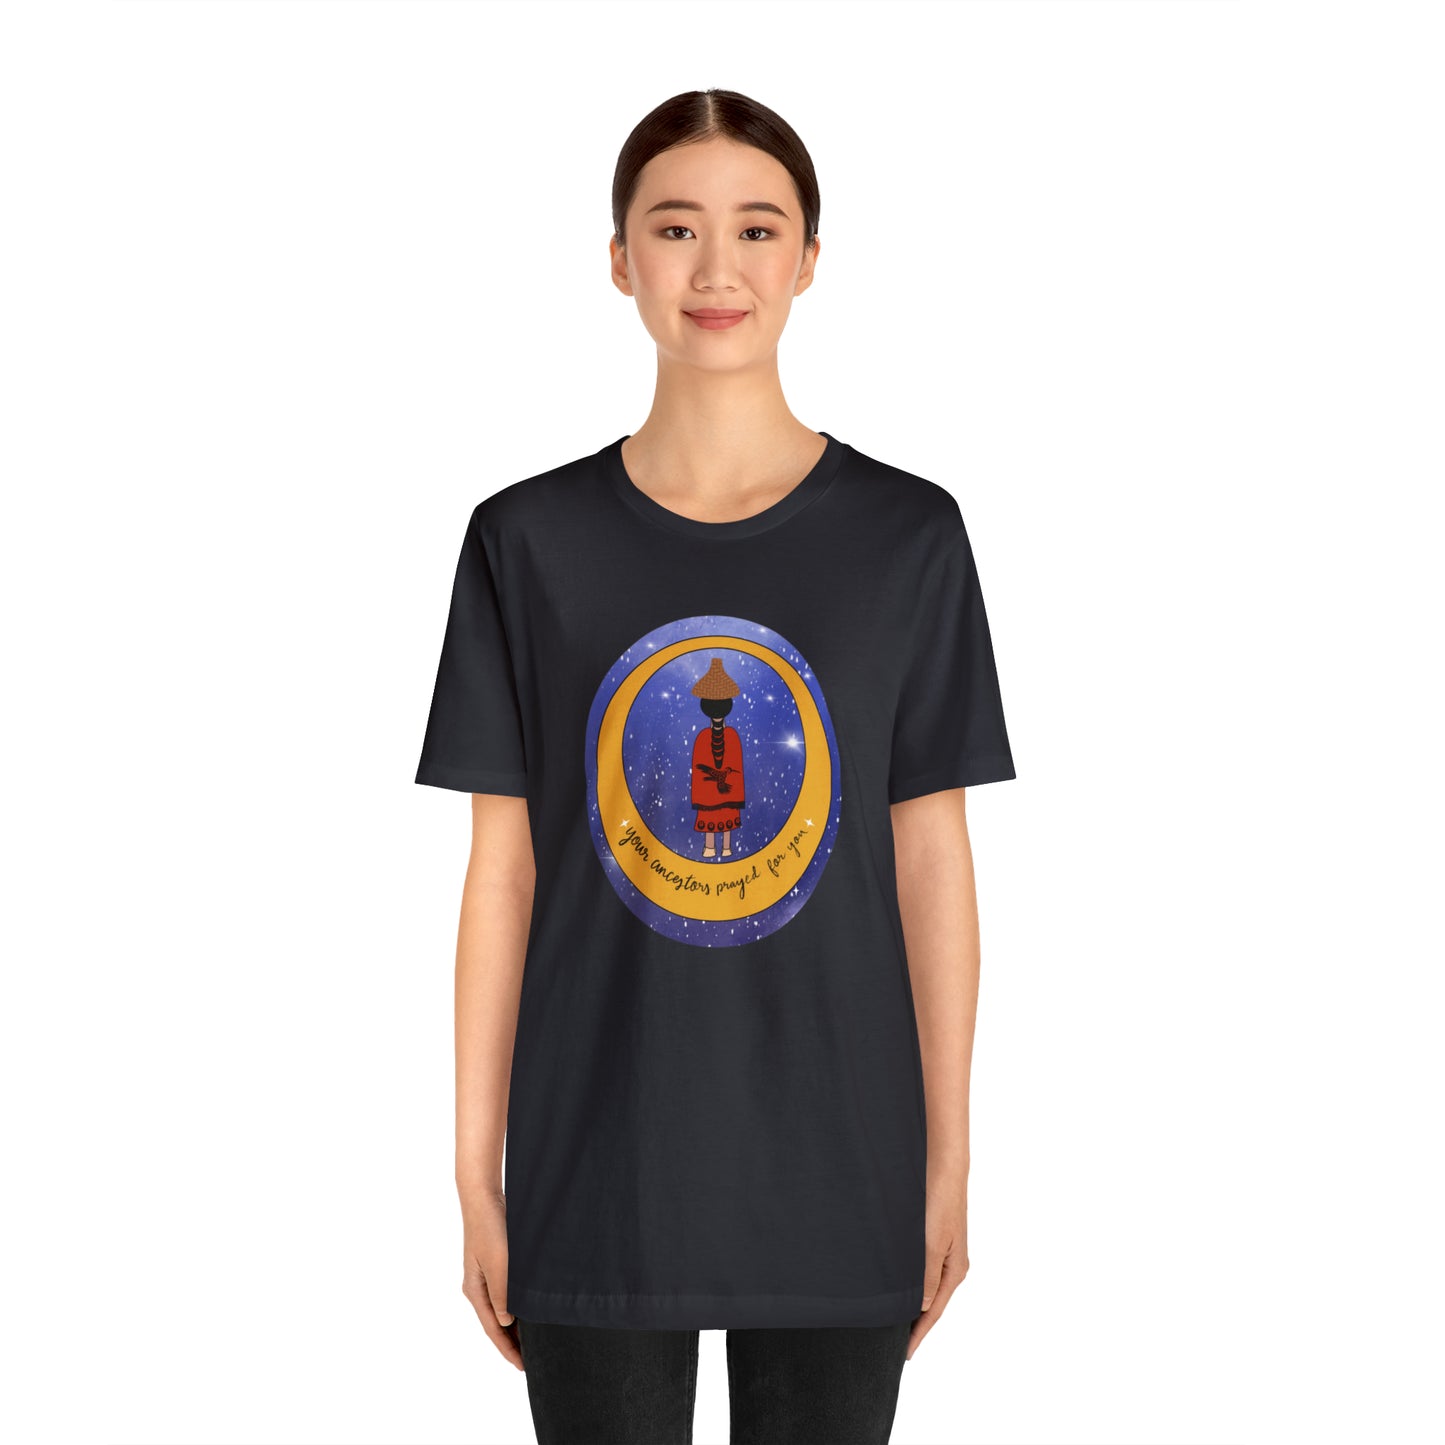 Your Ancestors Prayed For You Tee